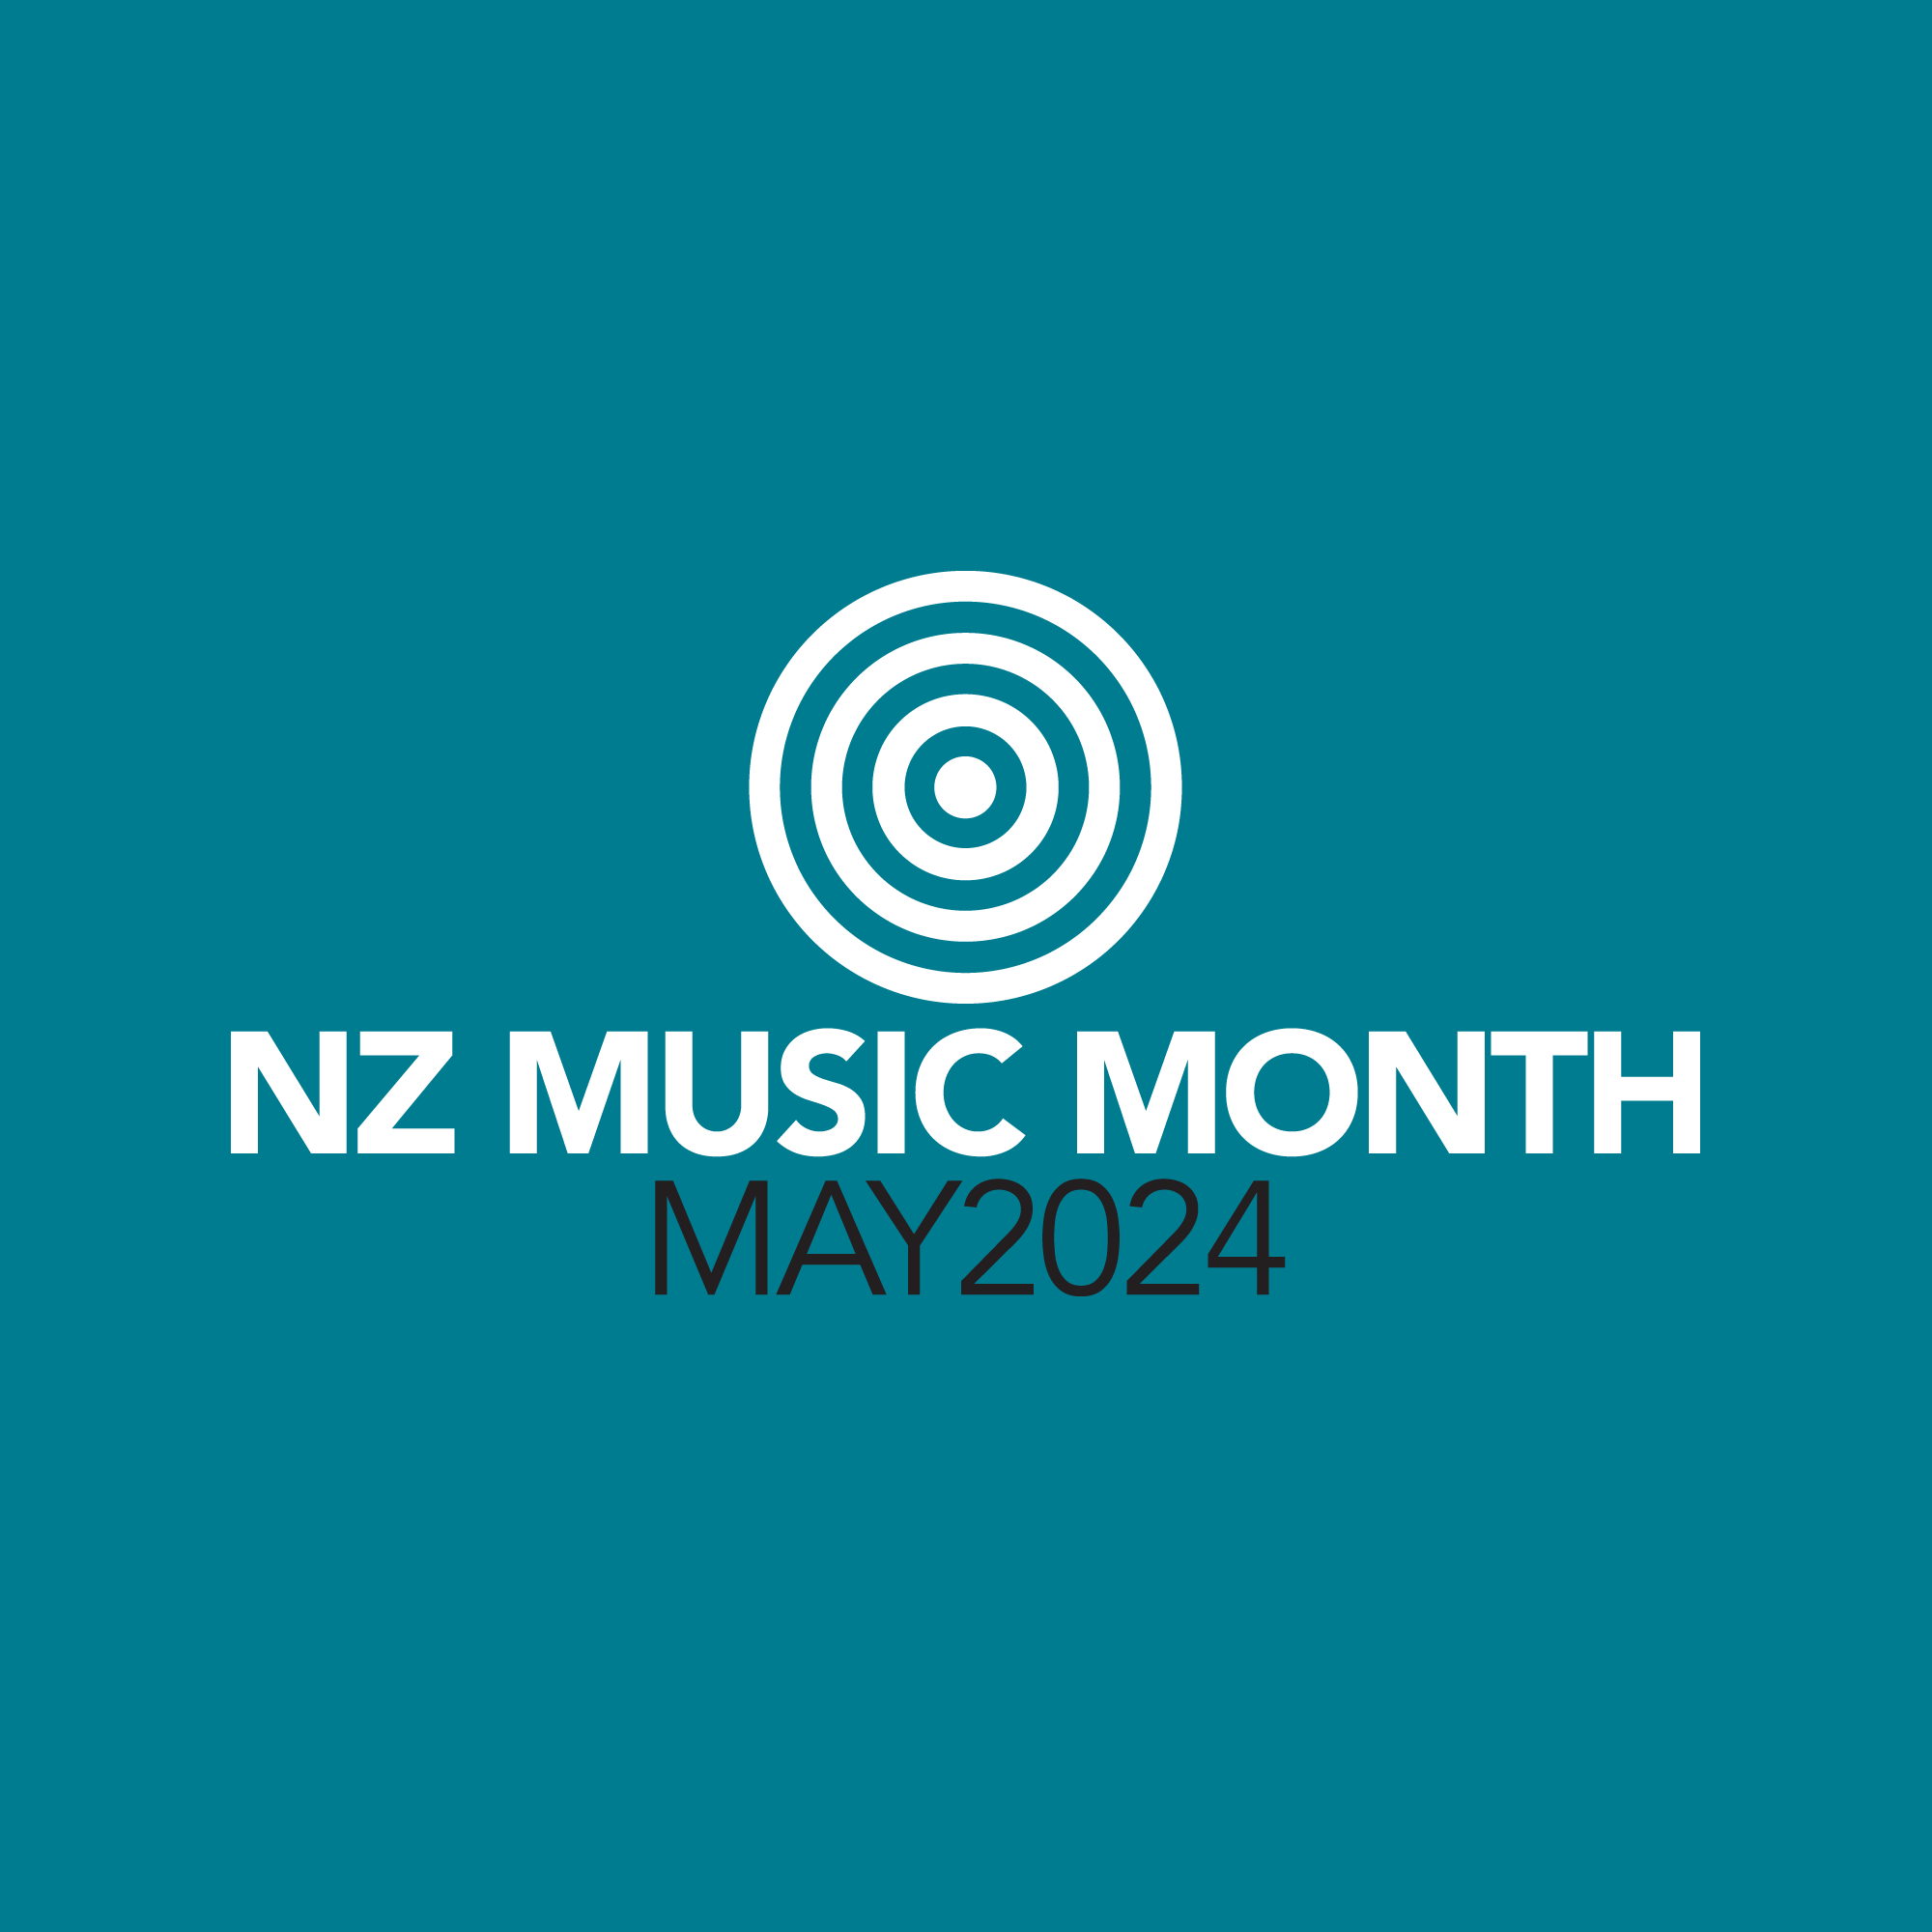 NZ MUSIC MONTH 2024: Theme and Colour Announced